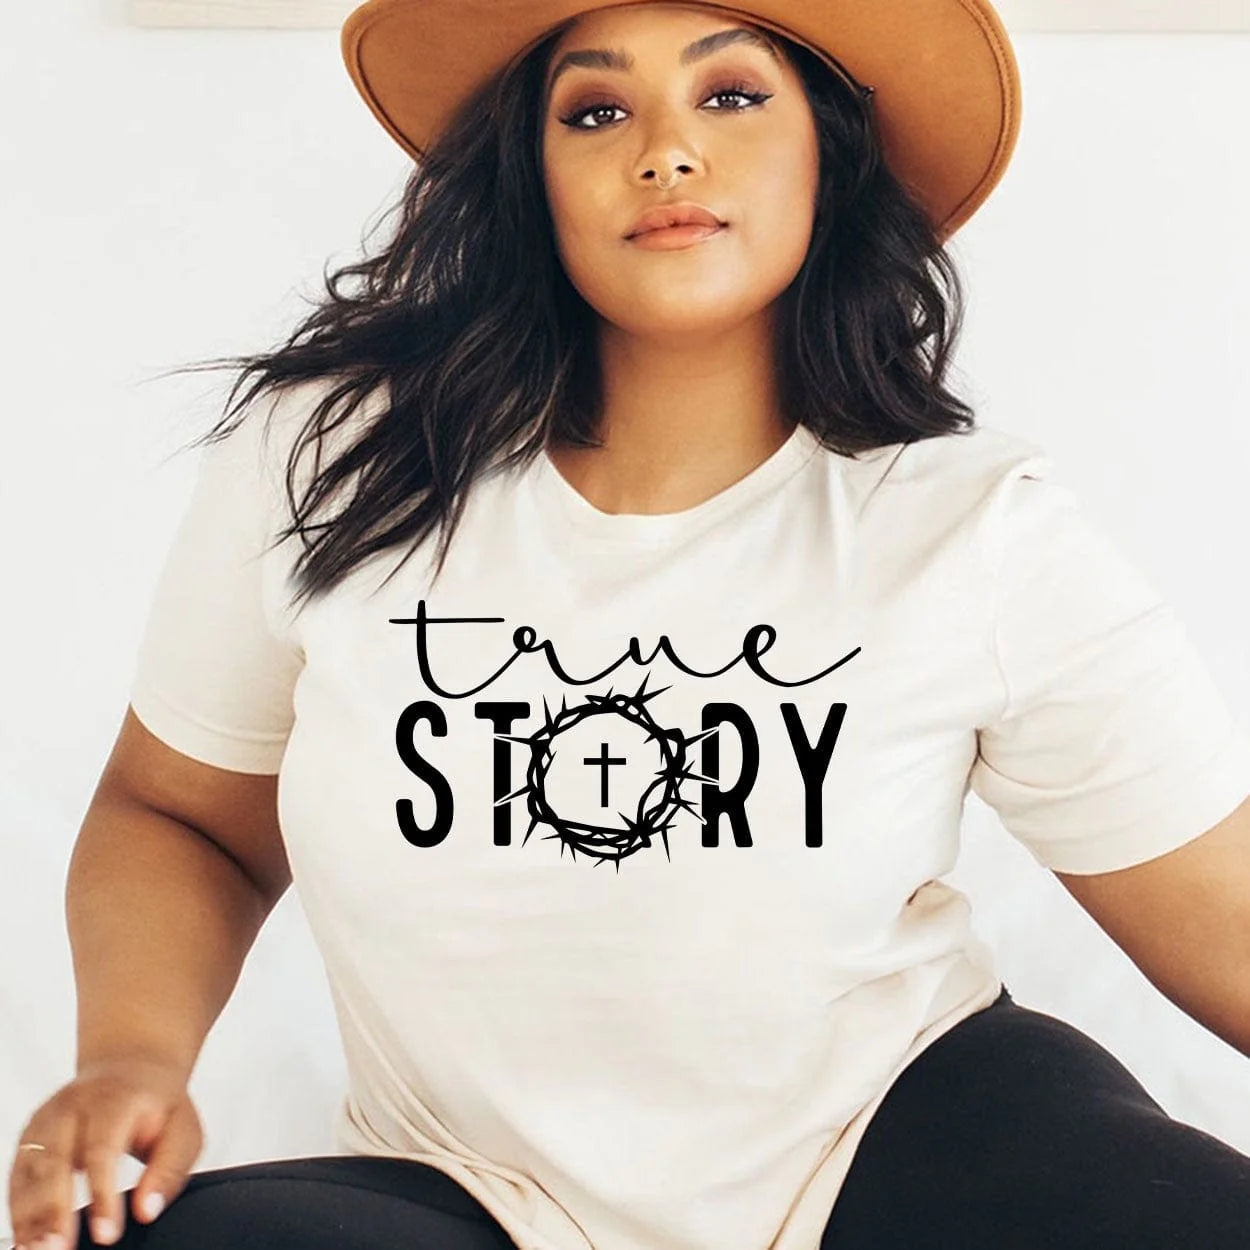 A cream colored short sleeve tee with the words "True story" in the middle. "True" being in cursive and "story" in a bold font with the O replaced with barbed wire and a cross in the center. Item is pictured on a plain white background.